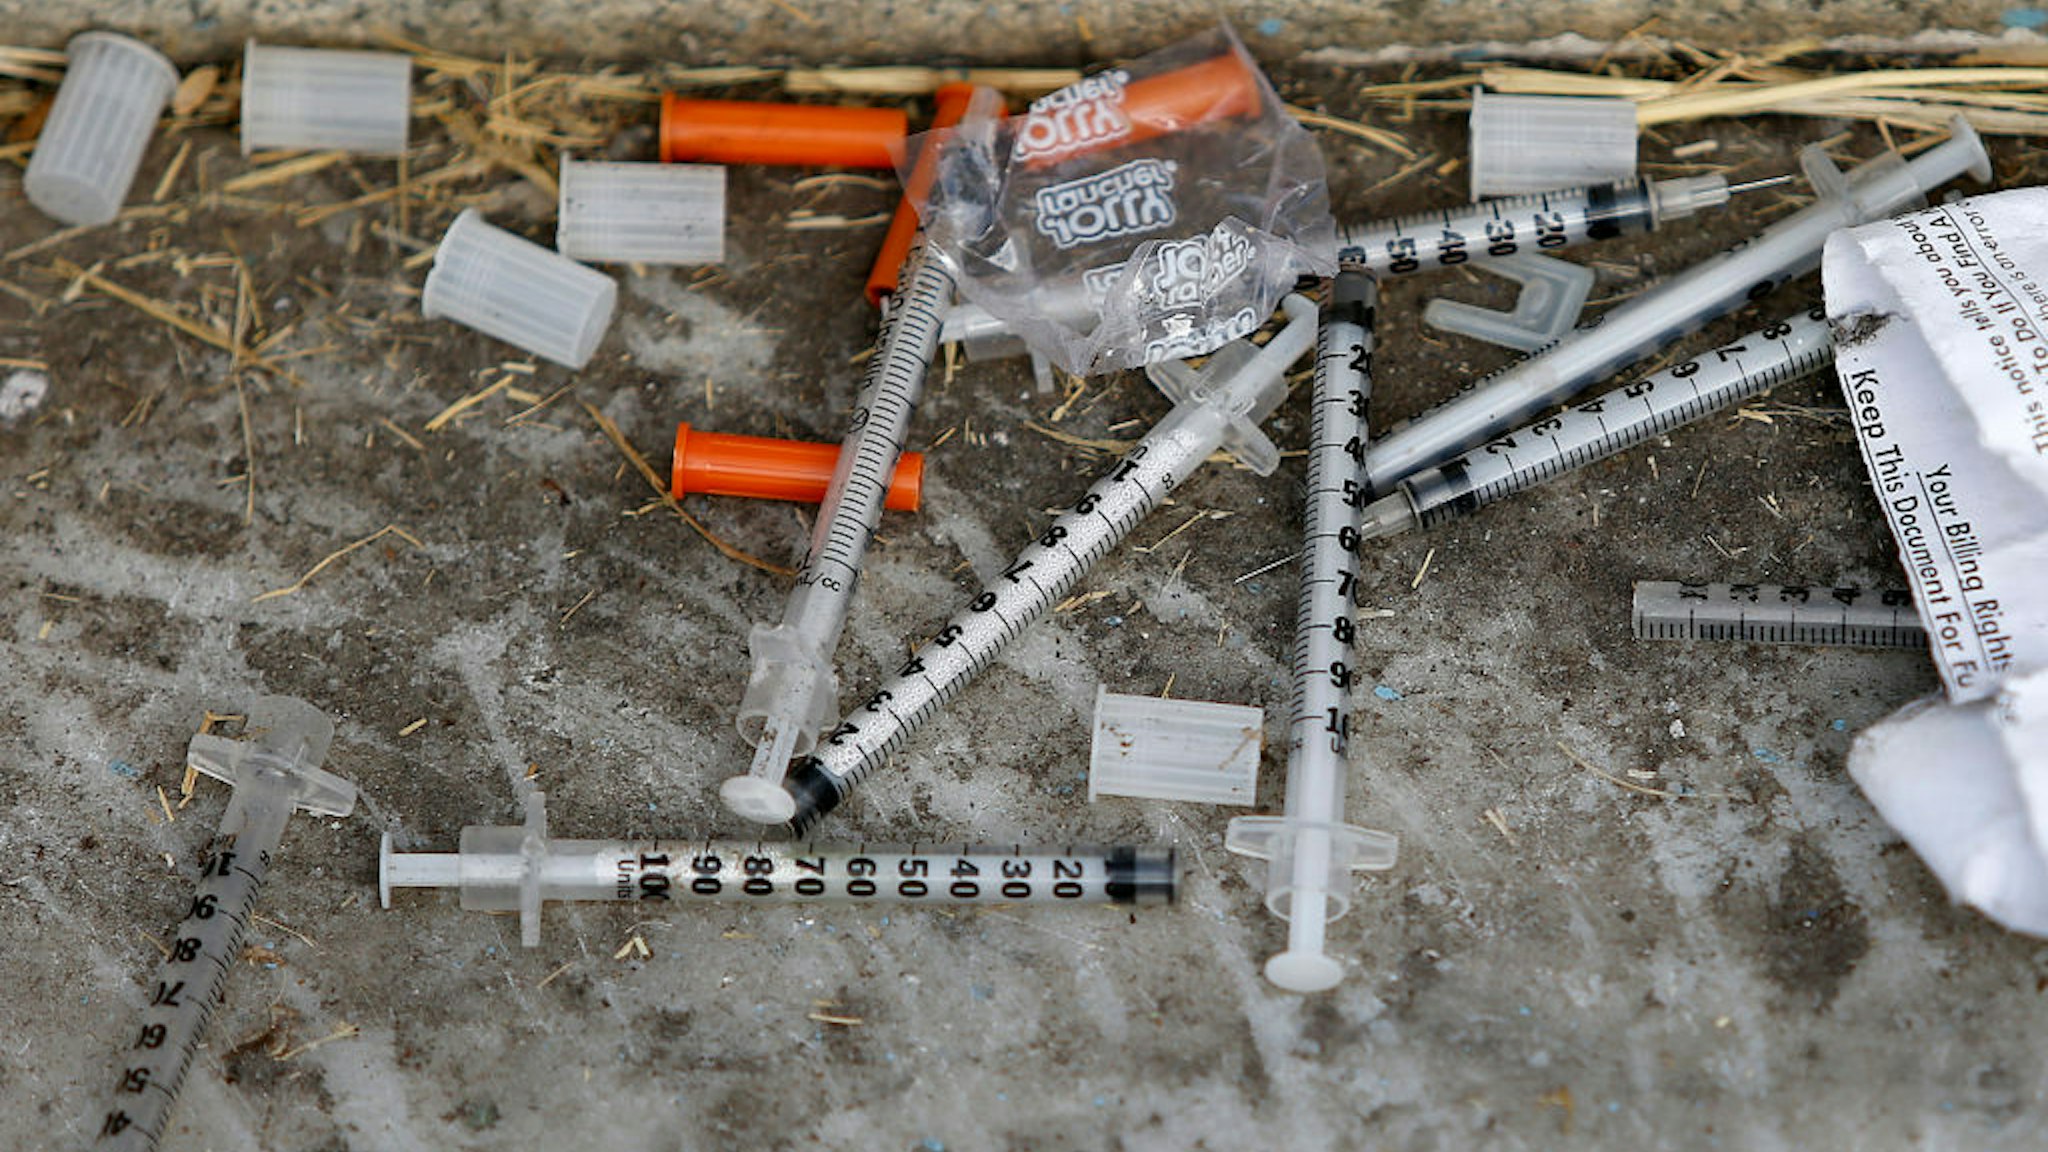 Syringes found at the base of the Pioneer monument on Fulton St. between the SF Main library and the Asian Art Museum in San Francisco, California, on Wednesday, February 3, 2016. During the month of last September almost 4829 used syringes were found in the Civic Center, including 519 at the SF Main Library and 730 at the Asian Art Museum. (Photo By Liz Hafalia/The San Francisco Chronicle via Getty Images)